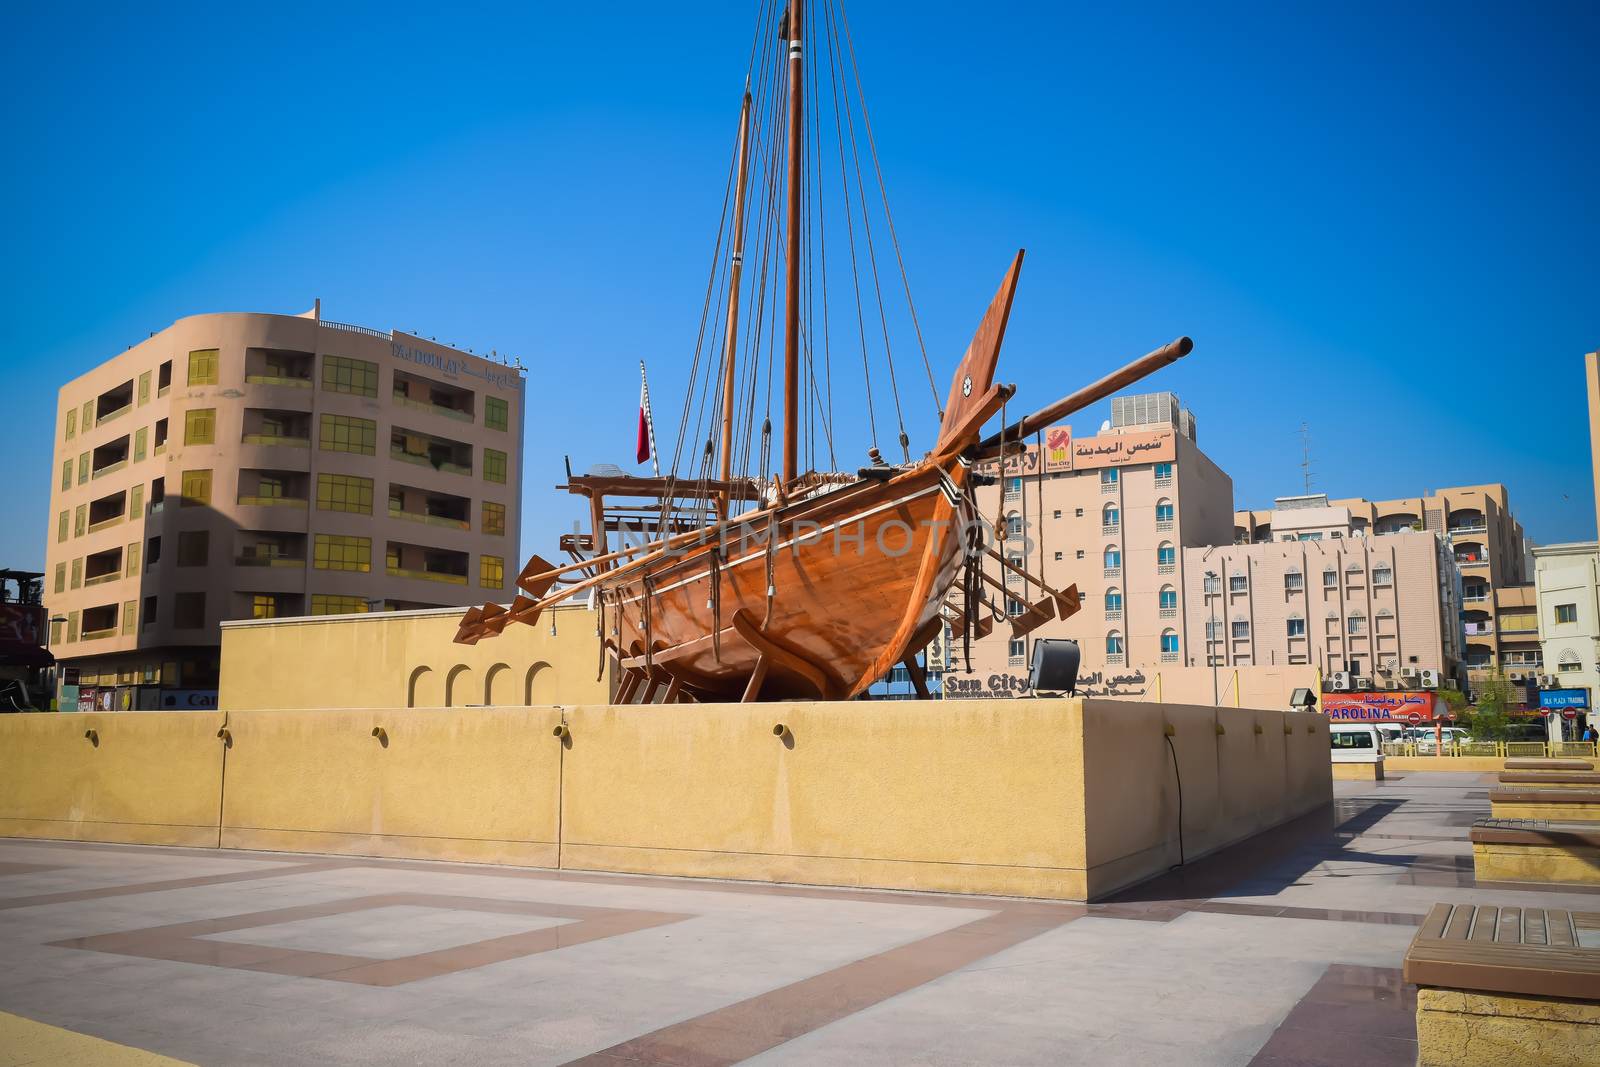 Old wooden boat called a Dhow outside the Dubai museum in UAE by sudiptabhowmick